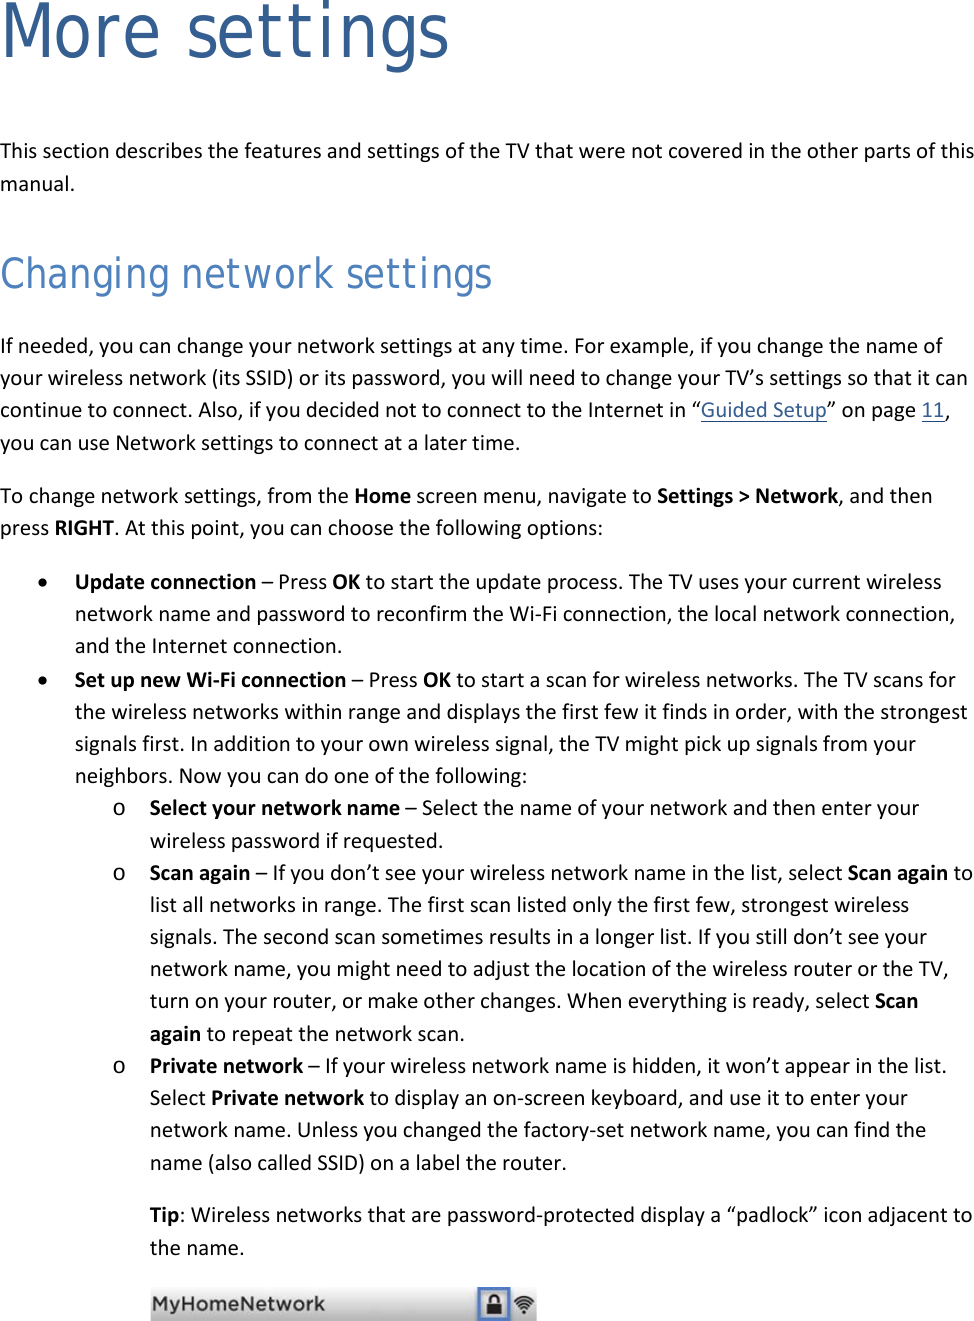  48 More settings This section describes the features and settings of the TV that were not covered in the other parts of this manual. Changing network settings If needed, you can change your network settings at any time. For example, if you change the name of your wireless network (its SSID) or its password, you will need to change your TV’s settings so that it can continue to connect. Also, if you decided not to connect to the Internet in “Guided Setup” on page 11, you can use Network settings to connect at a later time. To change network settings, from the Home screen menu, navigate to Settings &gt; Network, and then press RIGHT. At this point, you can choose the following options: • Update connection – Press OK to start the update process. The TV uses your current wireless network name and password to reconfirm the Wi-Fi connection, the local network connection, and the Internet connection. • Set up new Wi-Fi connection – Press OK to start a scan for wireless networks. The TV scans for the wireless networks within range and displays the first few it finds in order, with the strongest signals first. In addition to your own wireless signal, the TV might pick up signals from your neighbors. Now you can do one of the following: o Select your network name – Select the name of your network and then enter your wireless password if requested. o Scan again – If you don’t see your wireless network name in the list, select Scan again to list all networks in range. The first scan listed only the first few, strongest wireless signals. The second scan sometimes results in a longer list. If you still don’t see your network name, you might need to adjust the location of the wireless router or the TV, turn on your router, or make other changes. When everything is ready, select Scan again to repeat the network scan. o Private network – If your wireless network name is hidden, it won’t appear in the list. Select Private network to display an on-screen keyboard, and use it to enter your network name. Unless you changed the factory-set network name, you can find the name (also called SSID) on a label the router.  Tip: Wireless networks that are password-protected display a “padlock” icon adjacent to the name.    